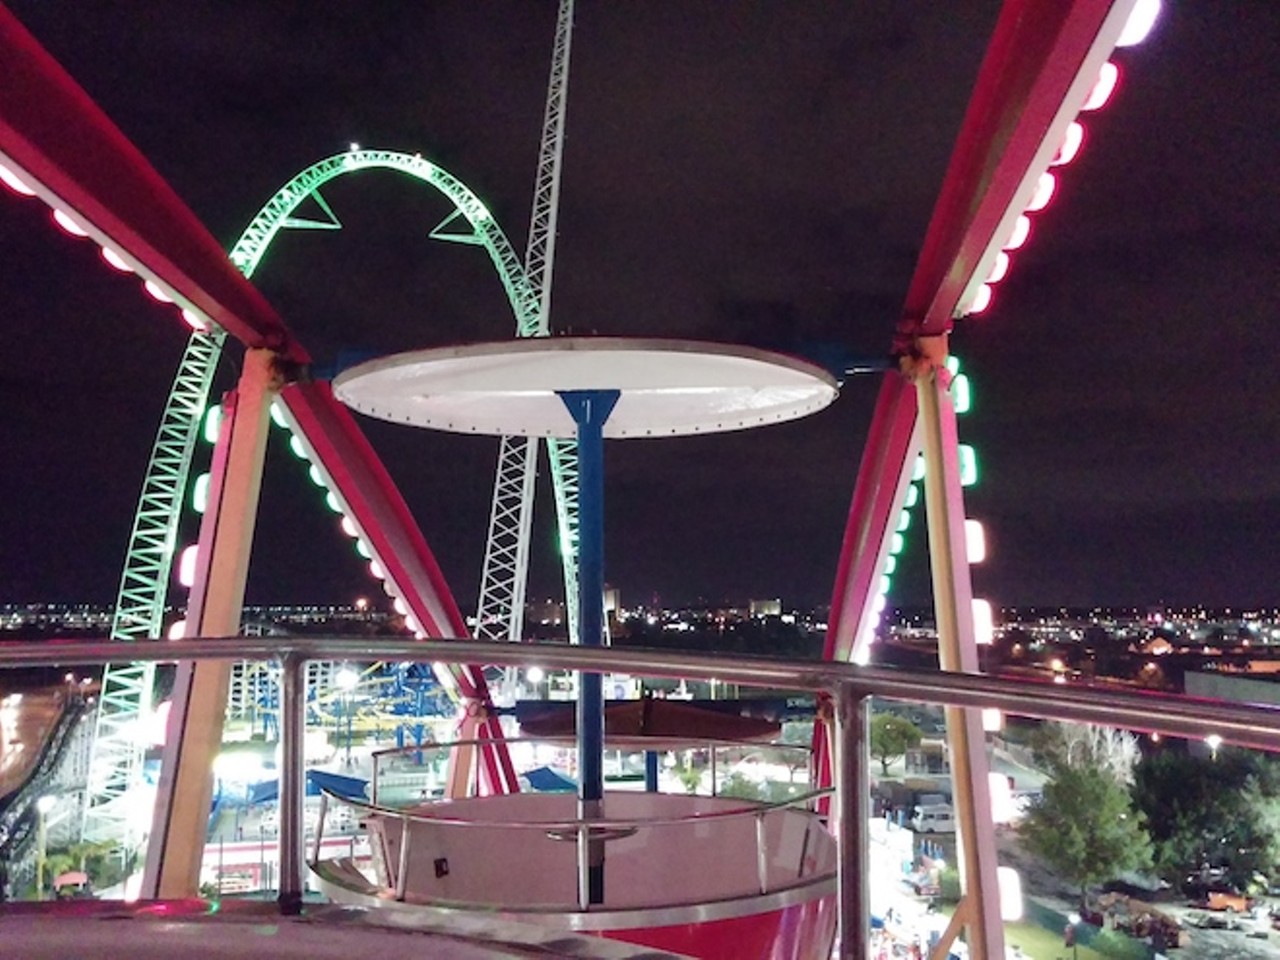 View from the top of the Fun Spot ferris wheelRelated: 13 reasons to love the expansion of Orlando's Fun Spot